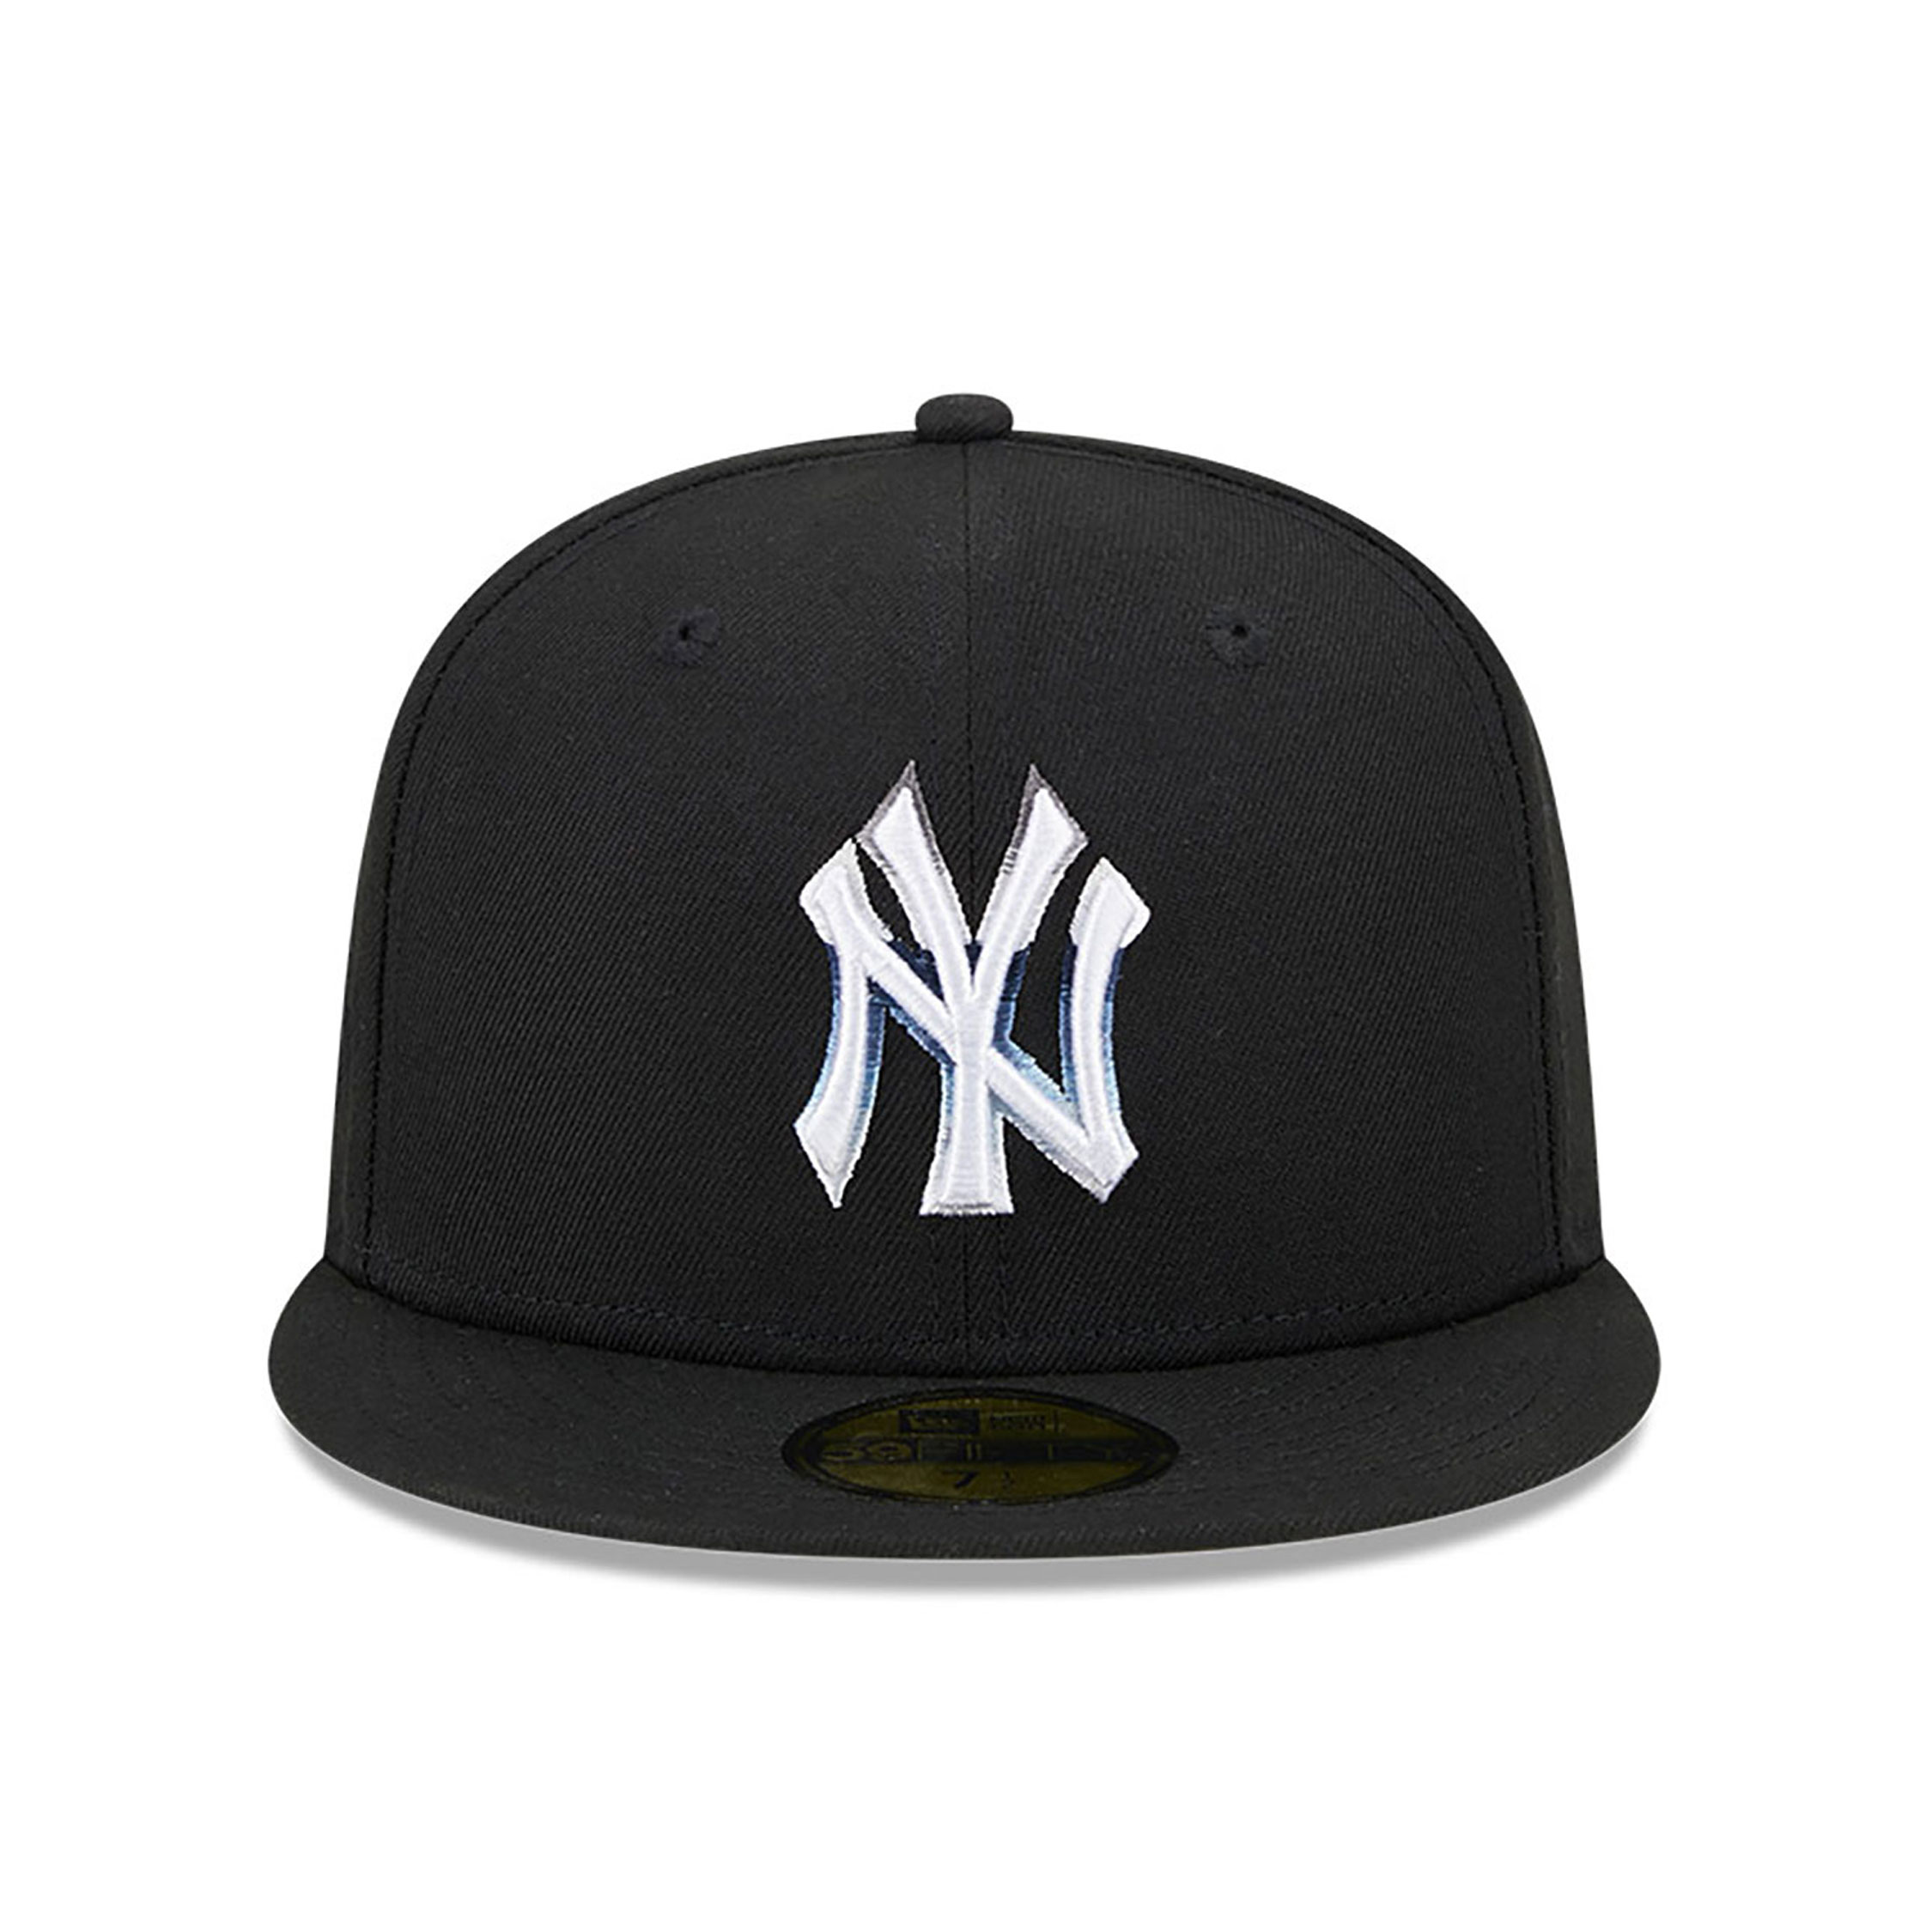 New York Yankees Raceway Black 59FIFTY Fitted Cap